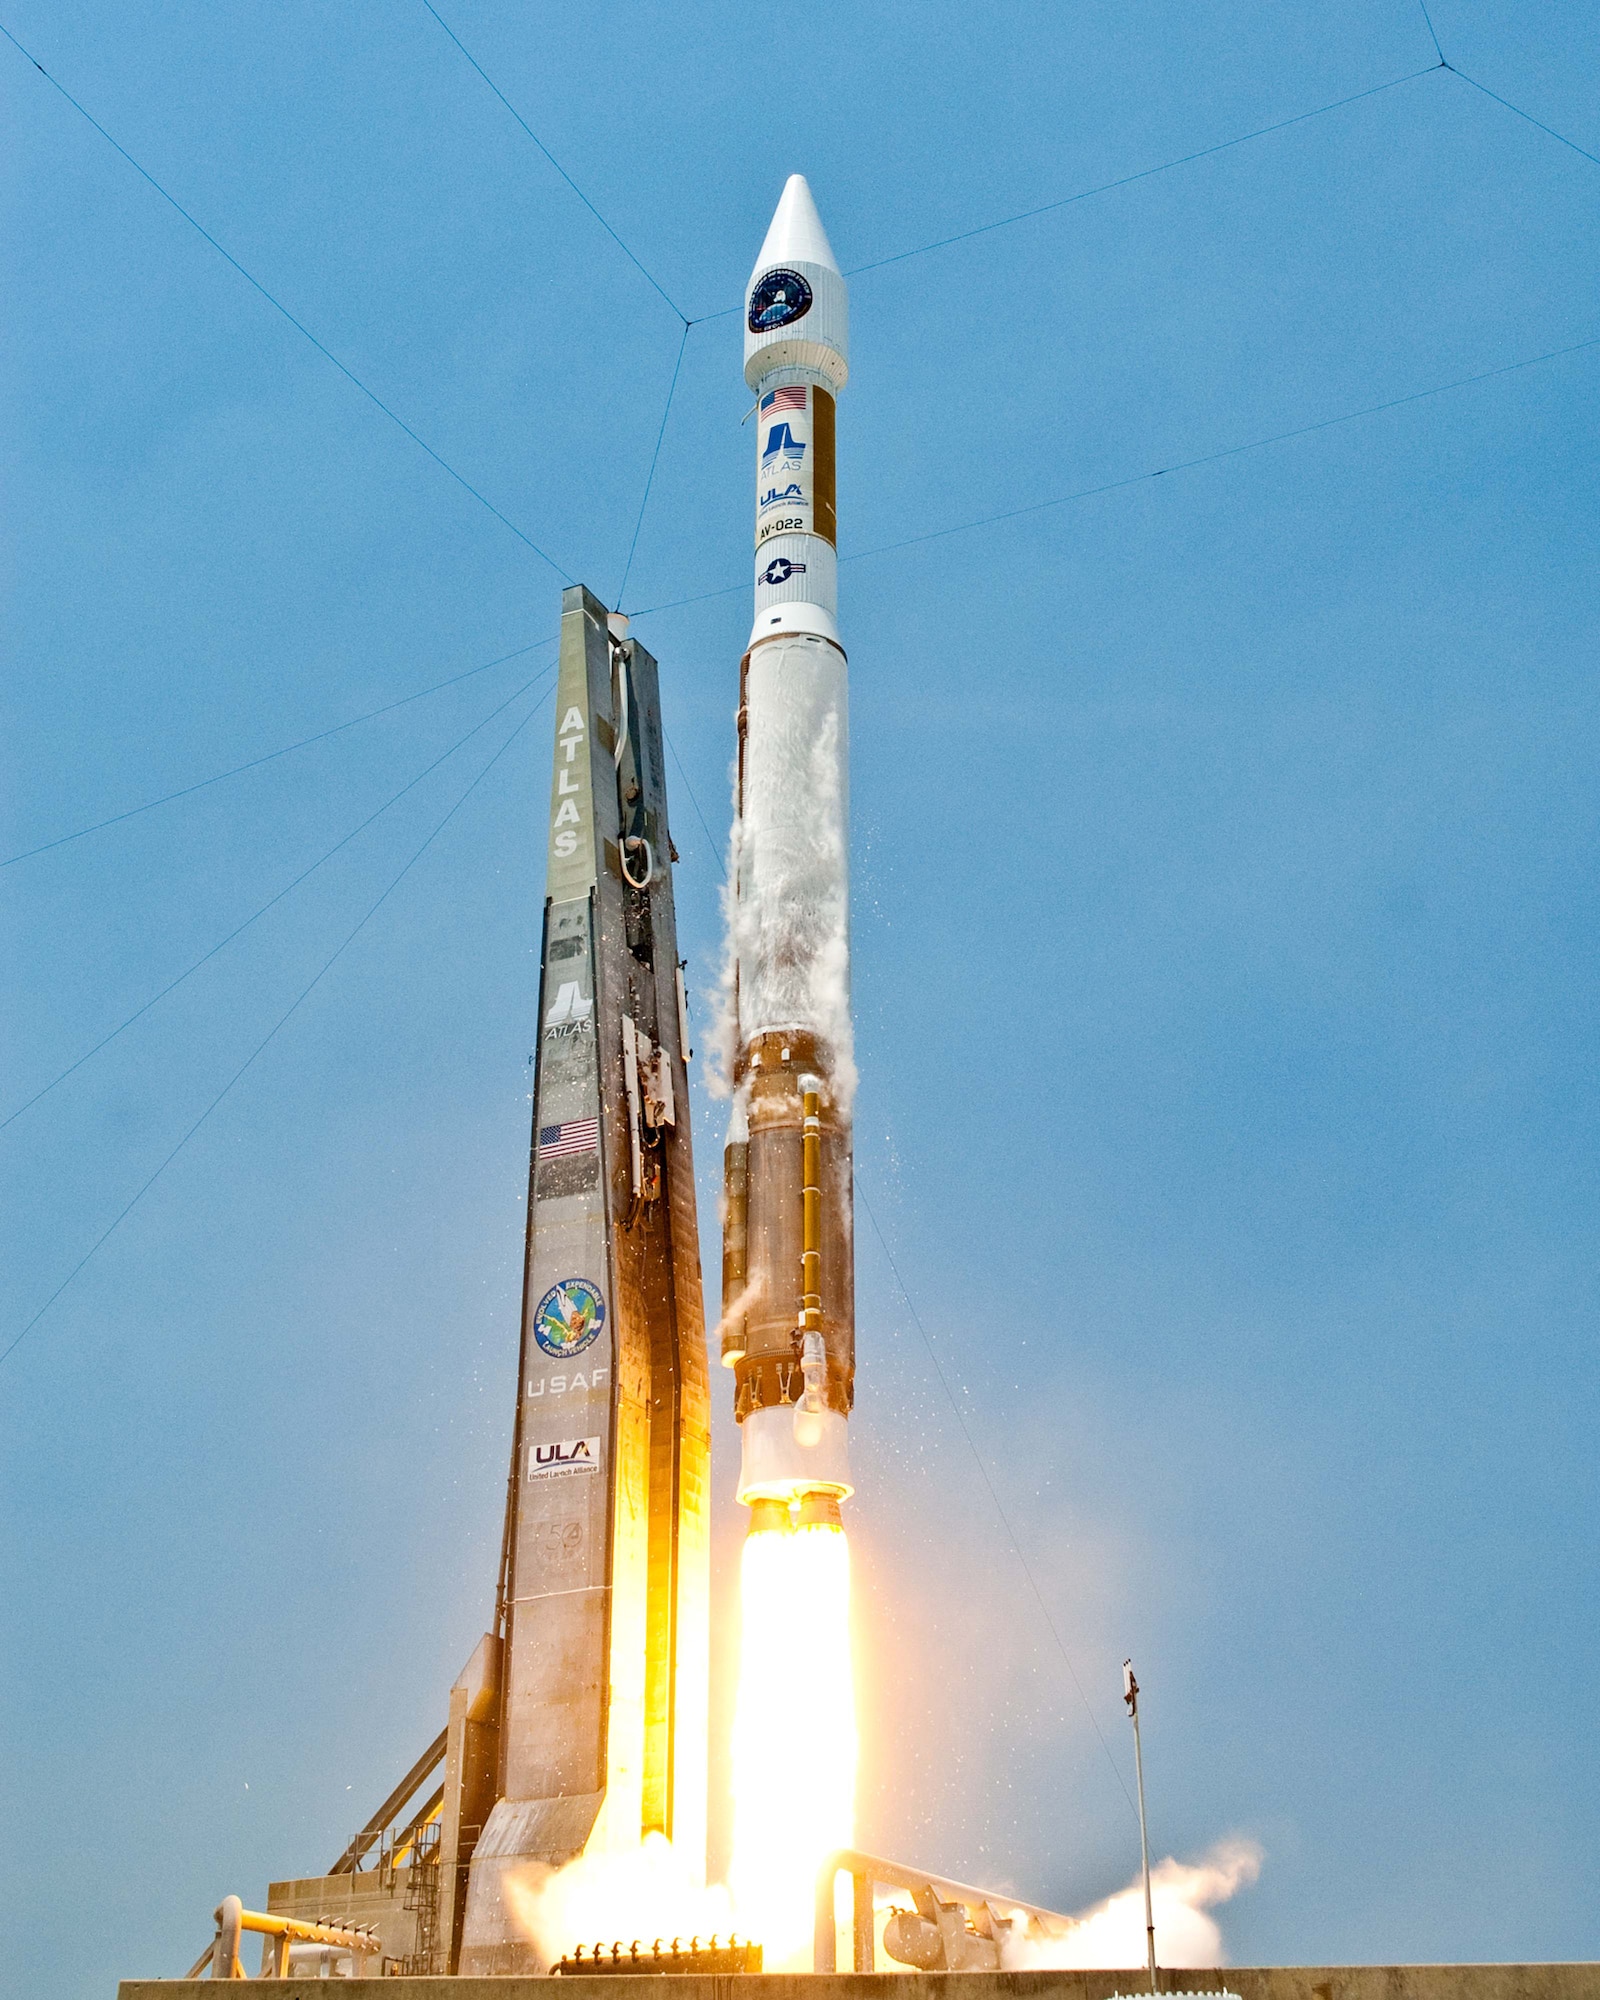 An Air Force Space Based Infrared Systems GEO-1 payload is launched aboard a United Launch Alliance Atlas V rocket May 7, 2011, from Space Launch Complex 41 at Cape Canaveral Air Force Station, Fla.  SBIRS is designed to provide global, overhead, persistent, infrared surveillance capability to meet 21st century demands in mission areas including missile warning, missile defense, technical intelligence and battlespace awareness.  (Courtesy photo/Pat Corkery, United Launch Alliance)